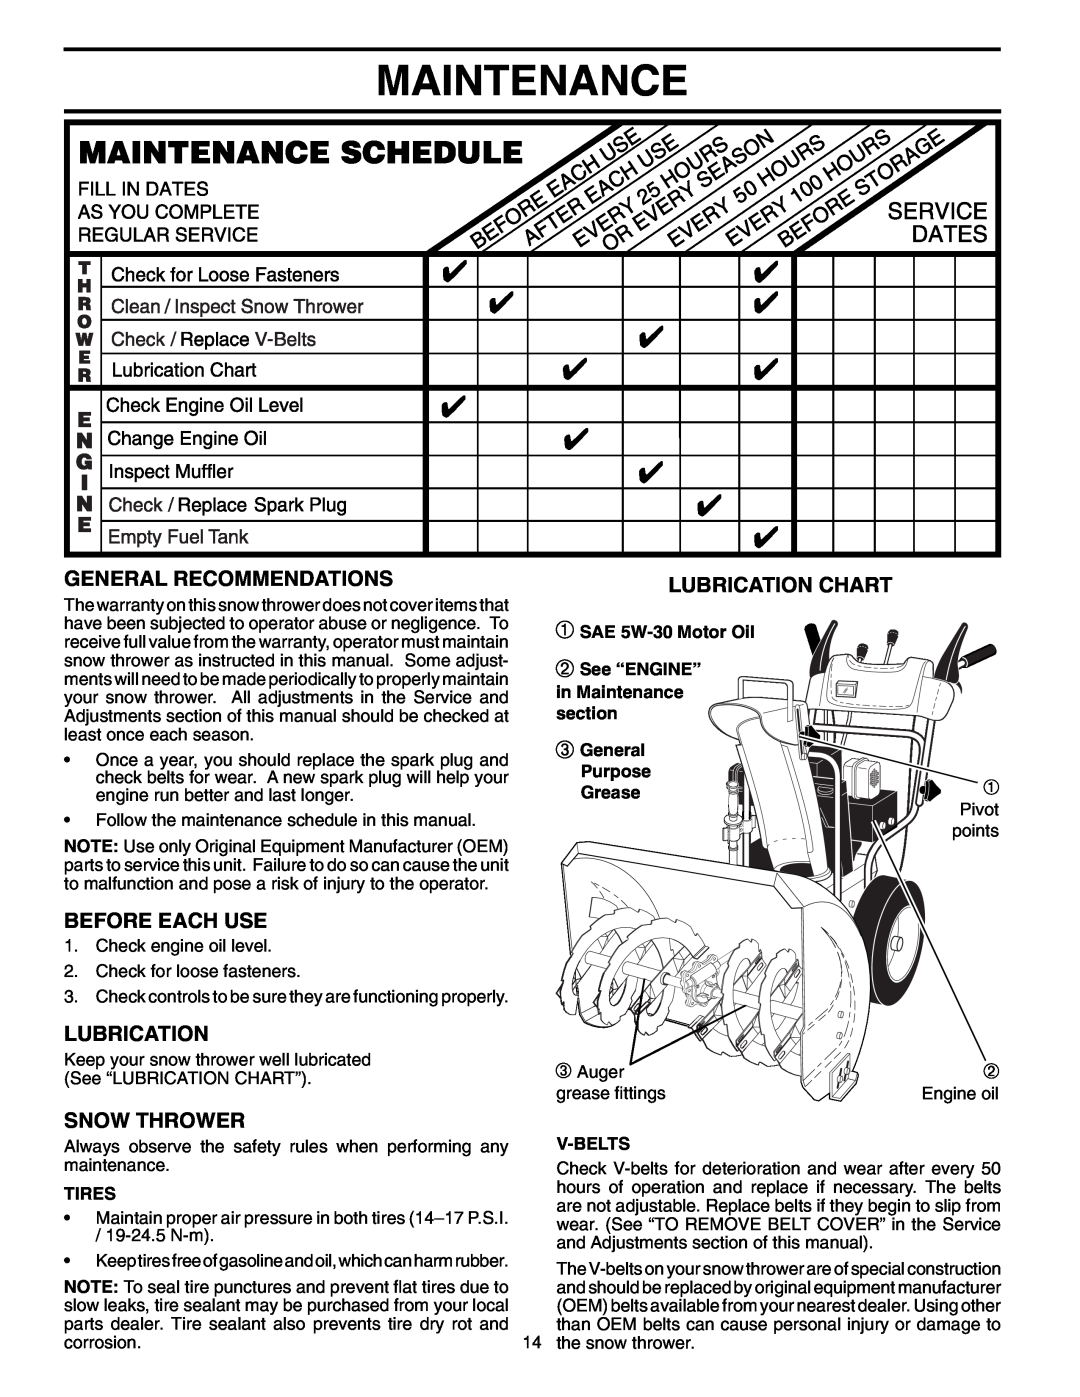 Poulan 96192001200 Maintenance, General Recommendations, Before Each Use, Lubrication Chart, Snow Thrower, Tires 